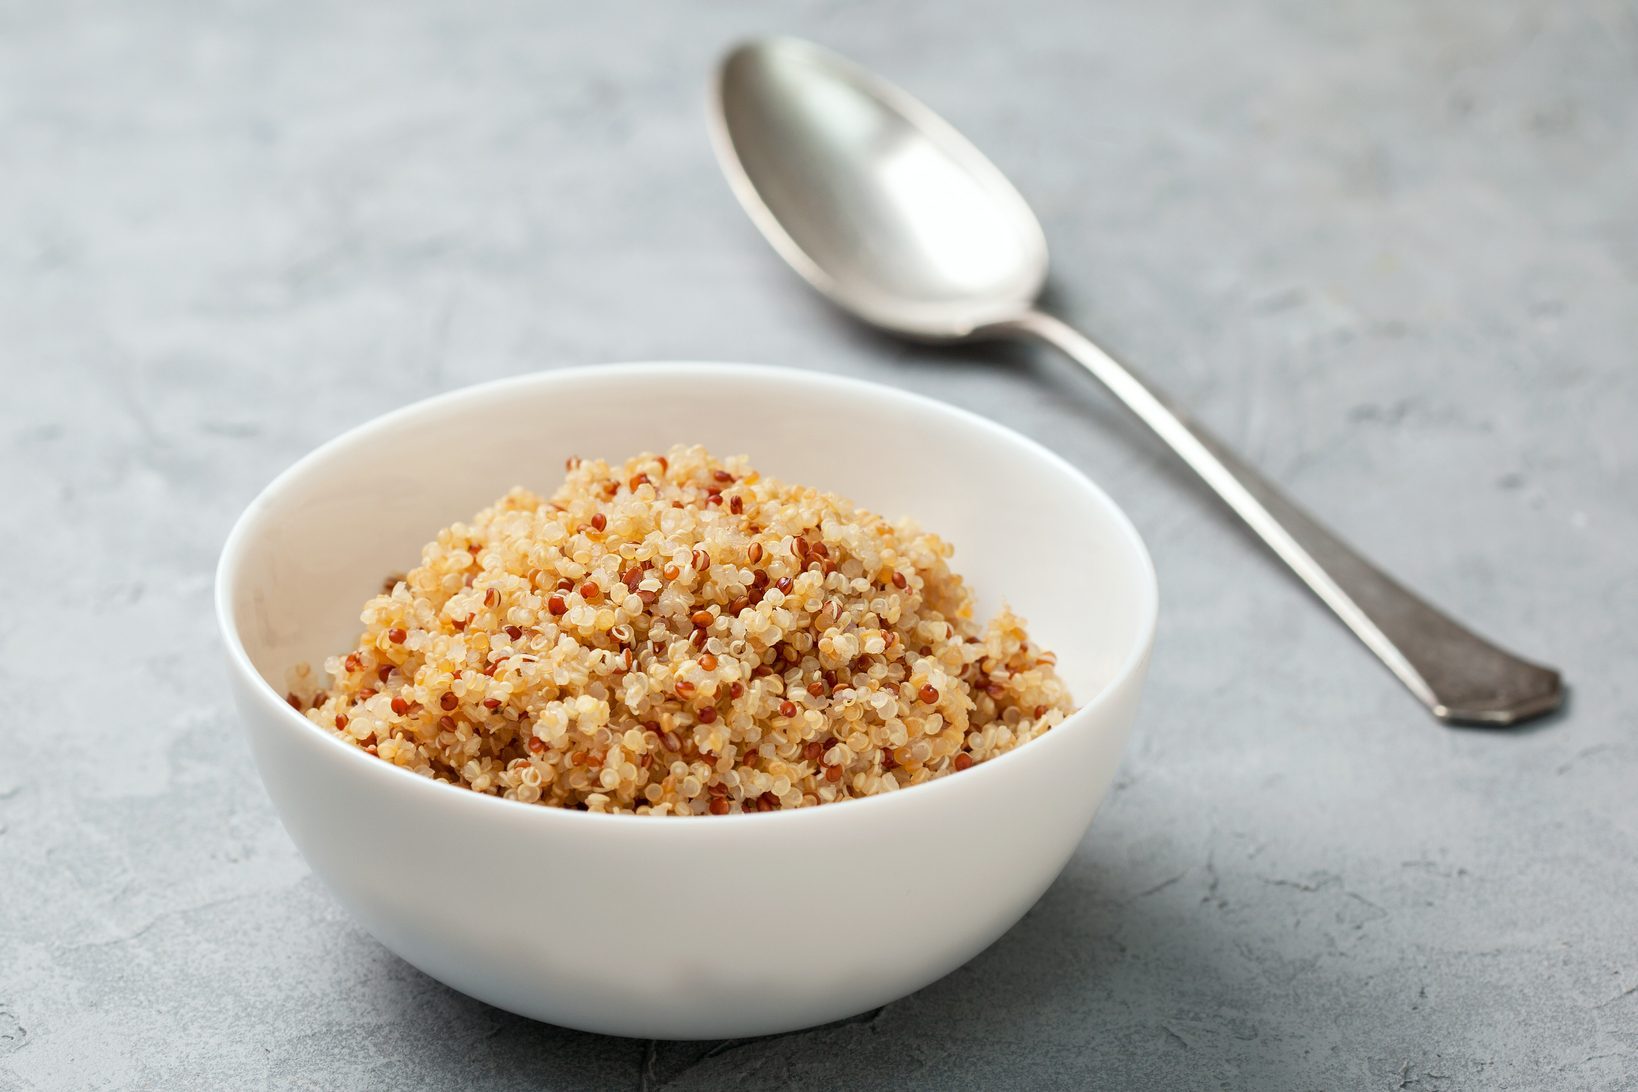 What to Know About Quinoa's Nutrition, Calories, and Benefits